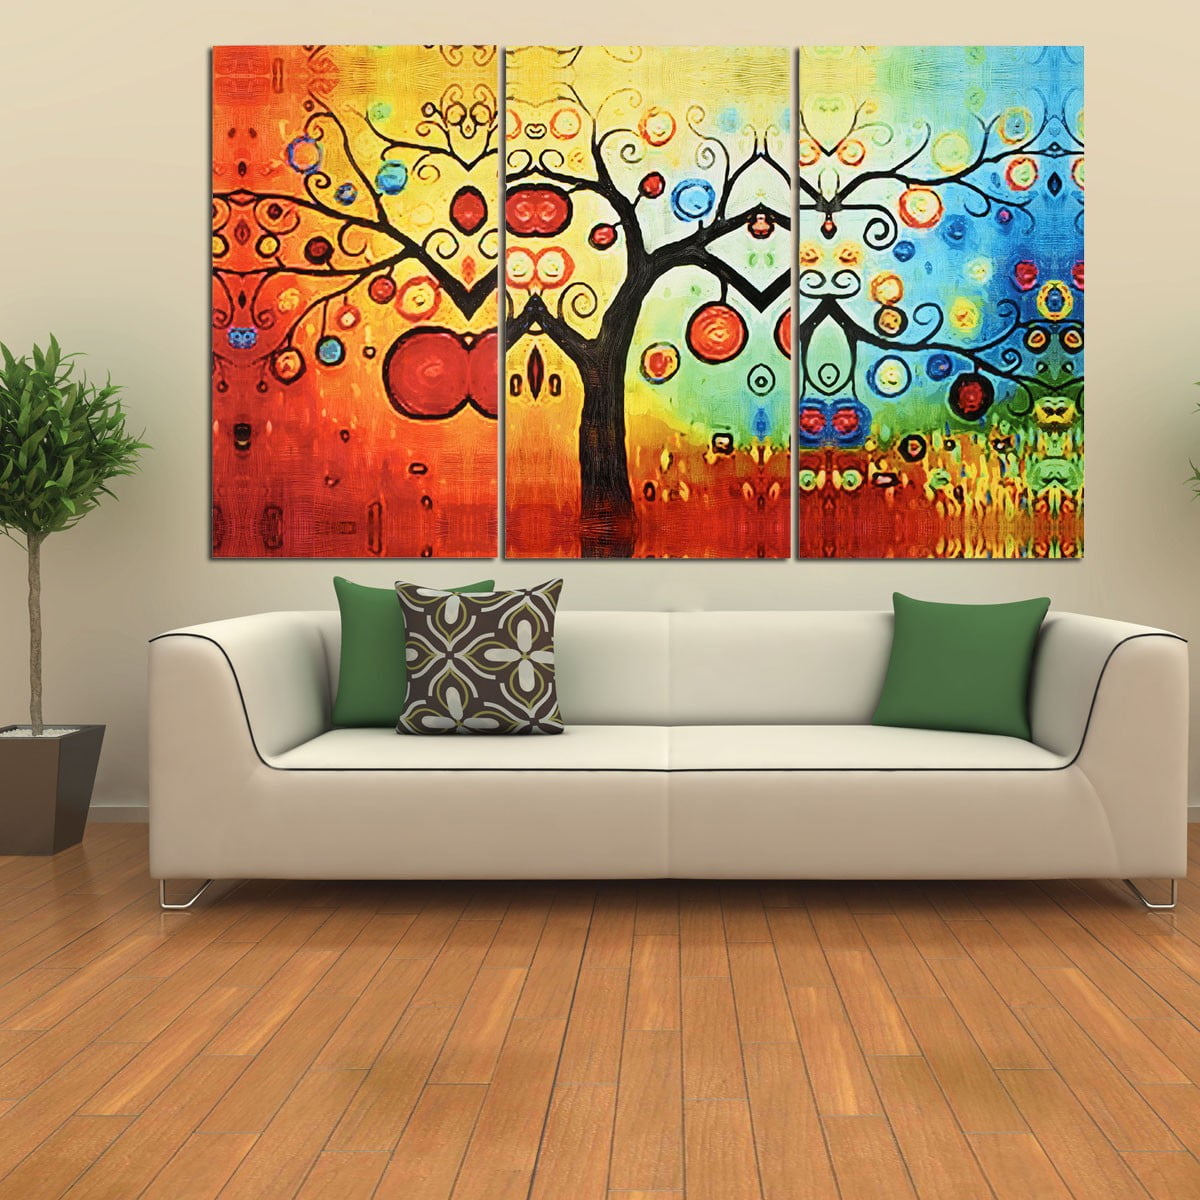 Colorful Tree Abstract Picture Canvas Prints Painting Home Wall Art Decor Framed 